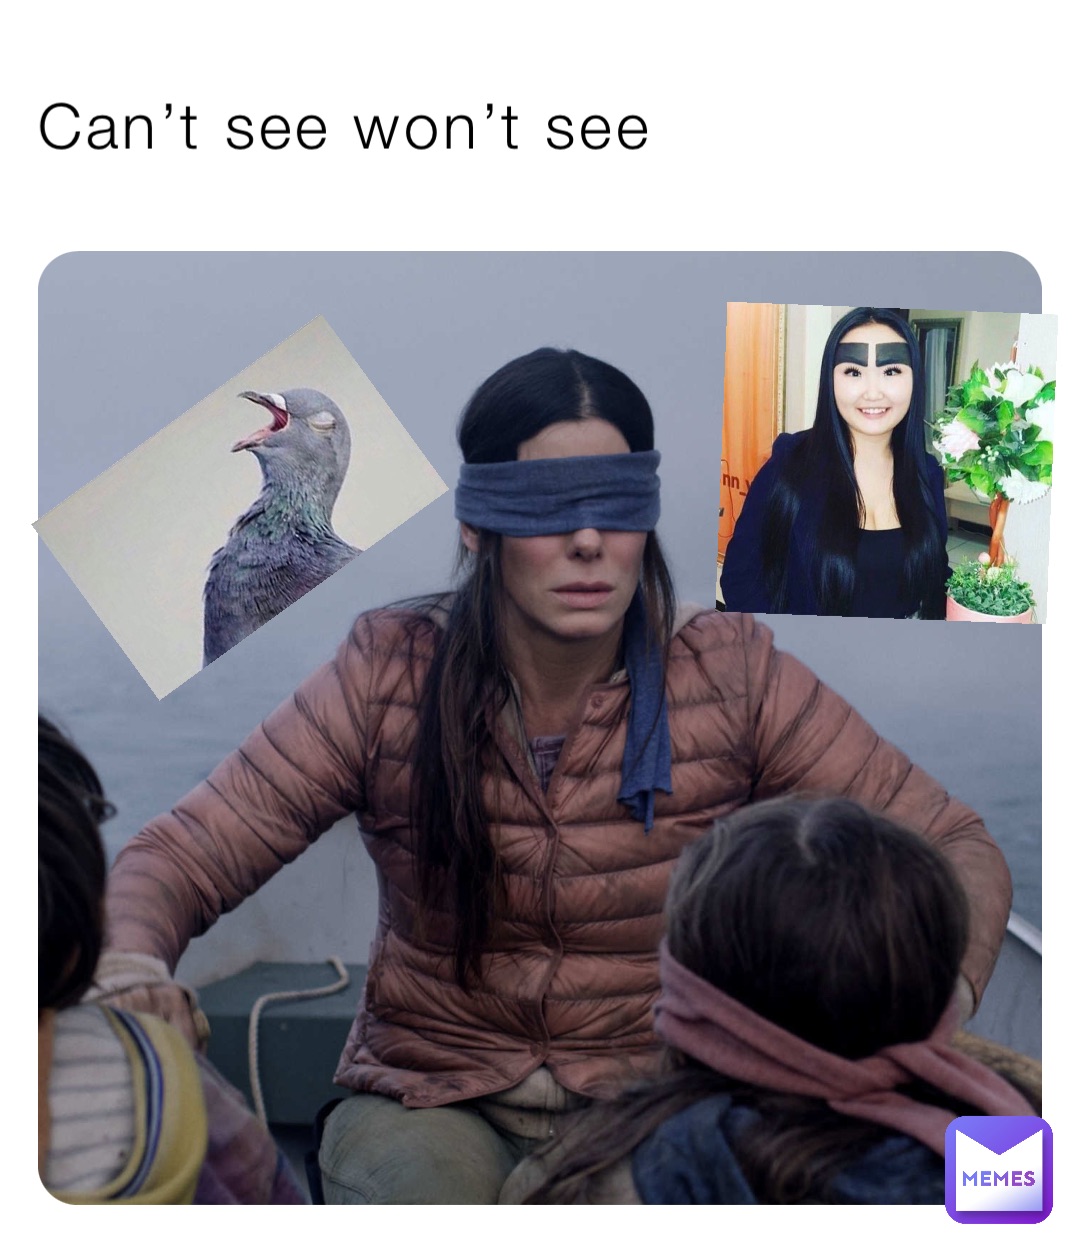 Can’t see won’t see